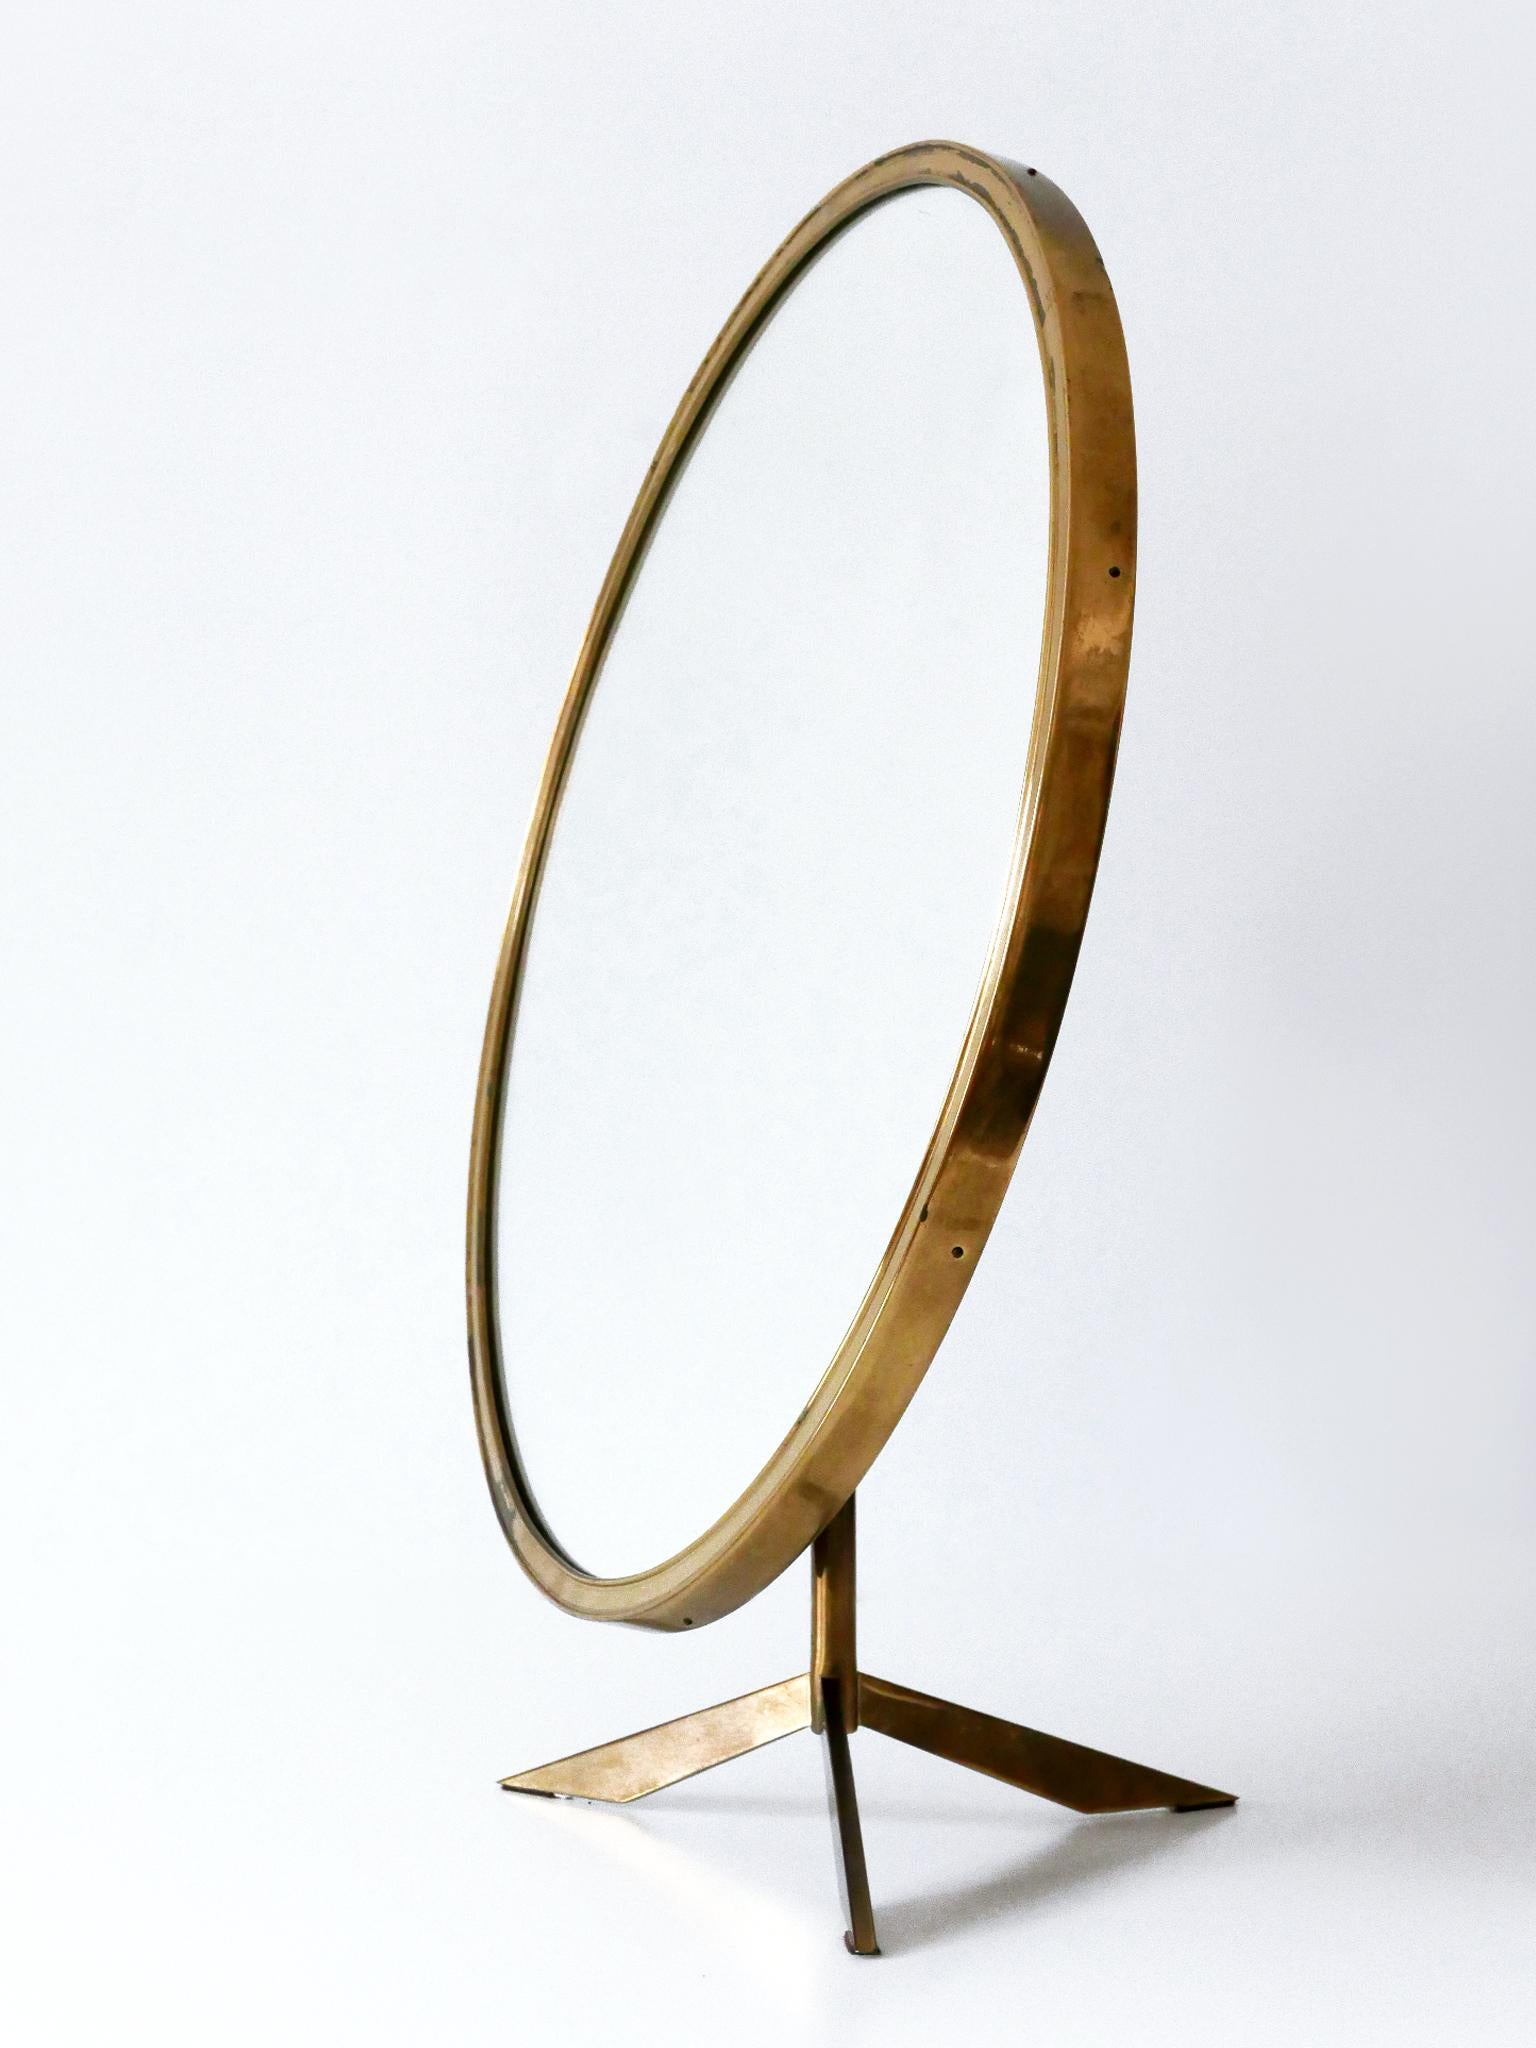 Elegant Mid-Century Modern Wall or Vanity Mirror by Zierform Germany 1950s For Sale 8